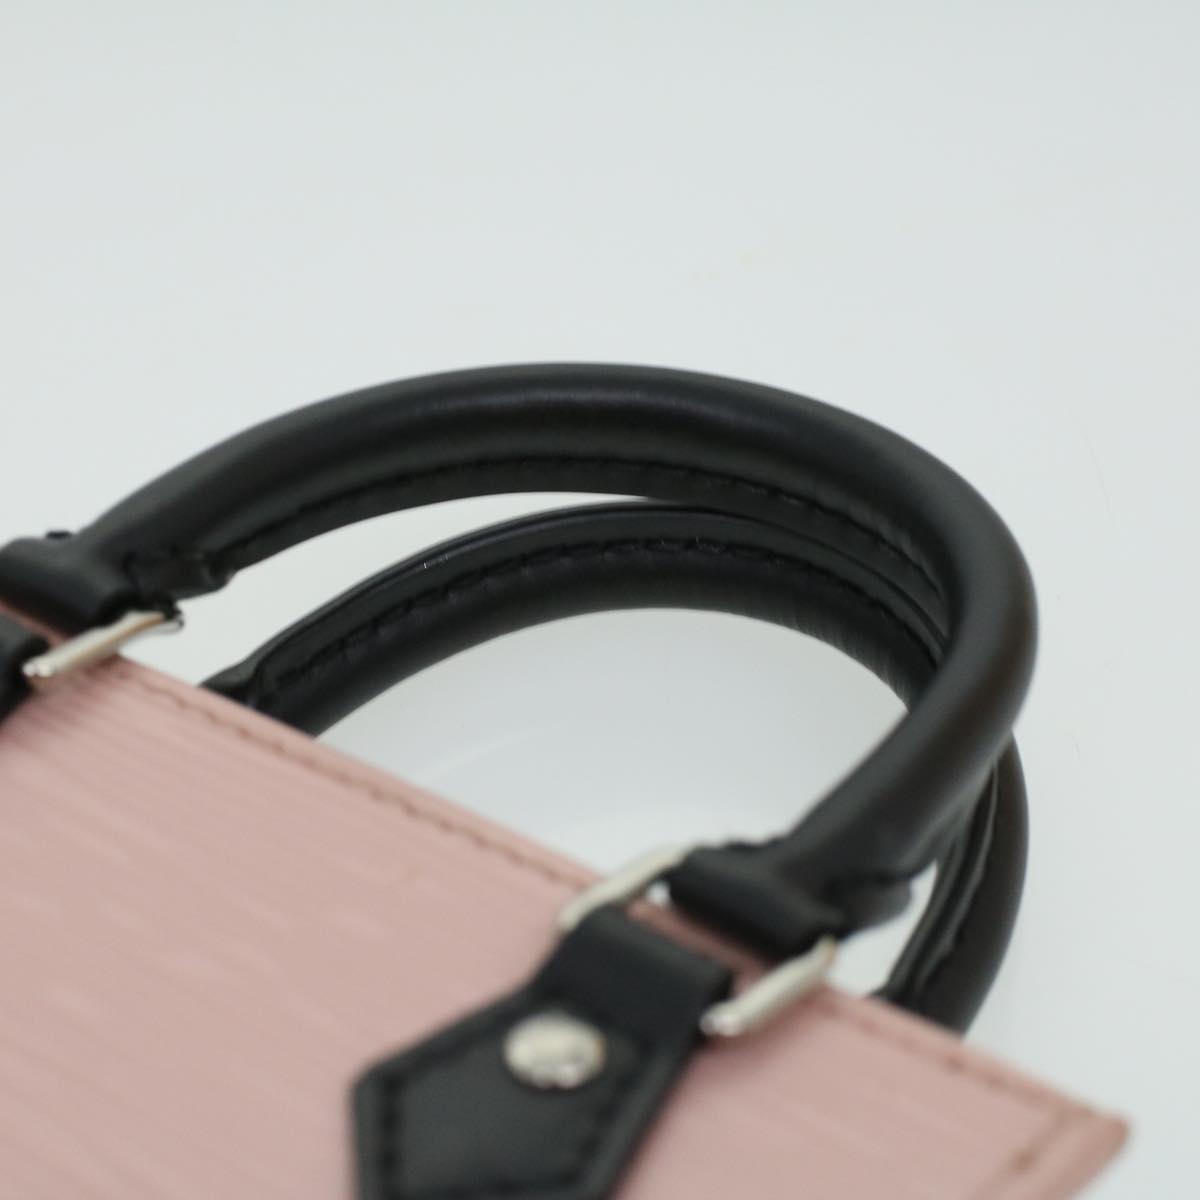 Plat leather handbag Louis Vuitton Pink in Leather - 26170228